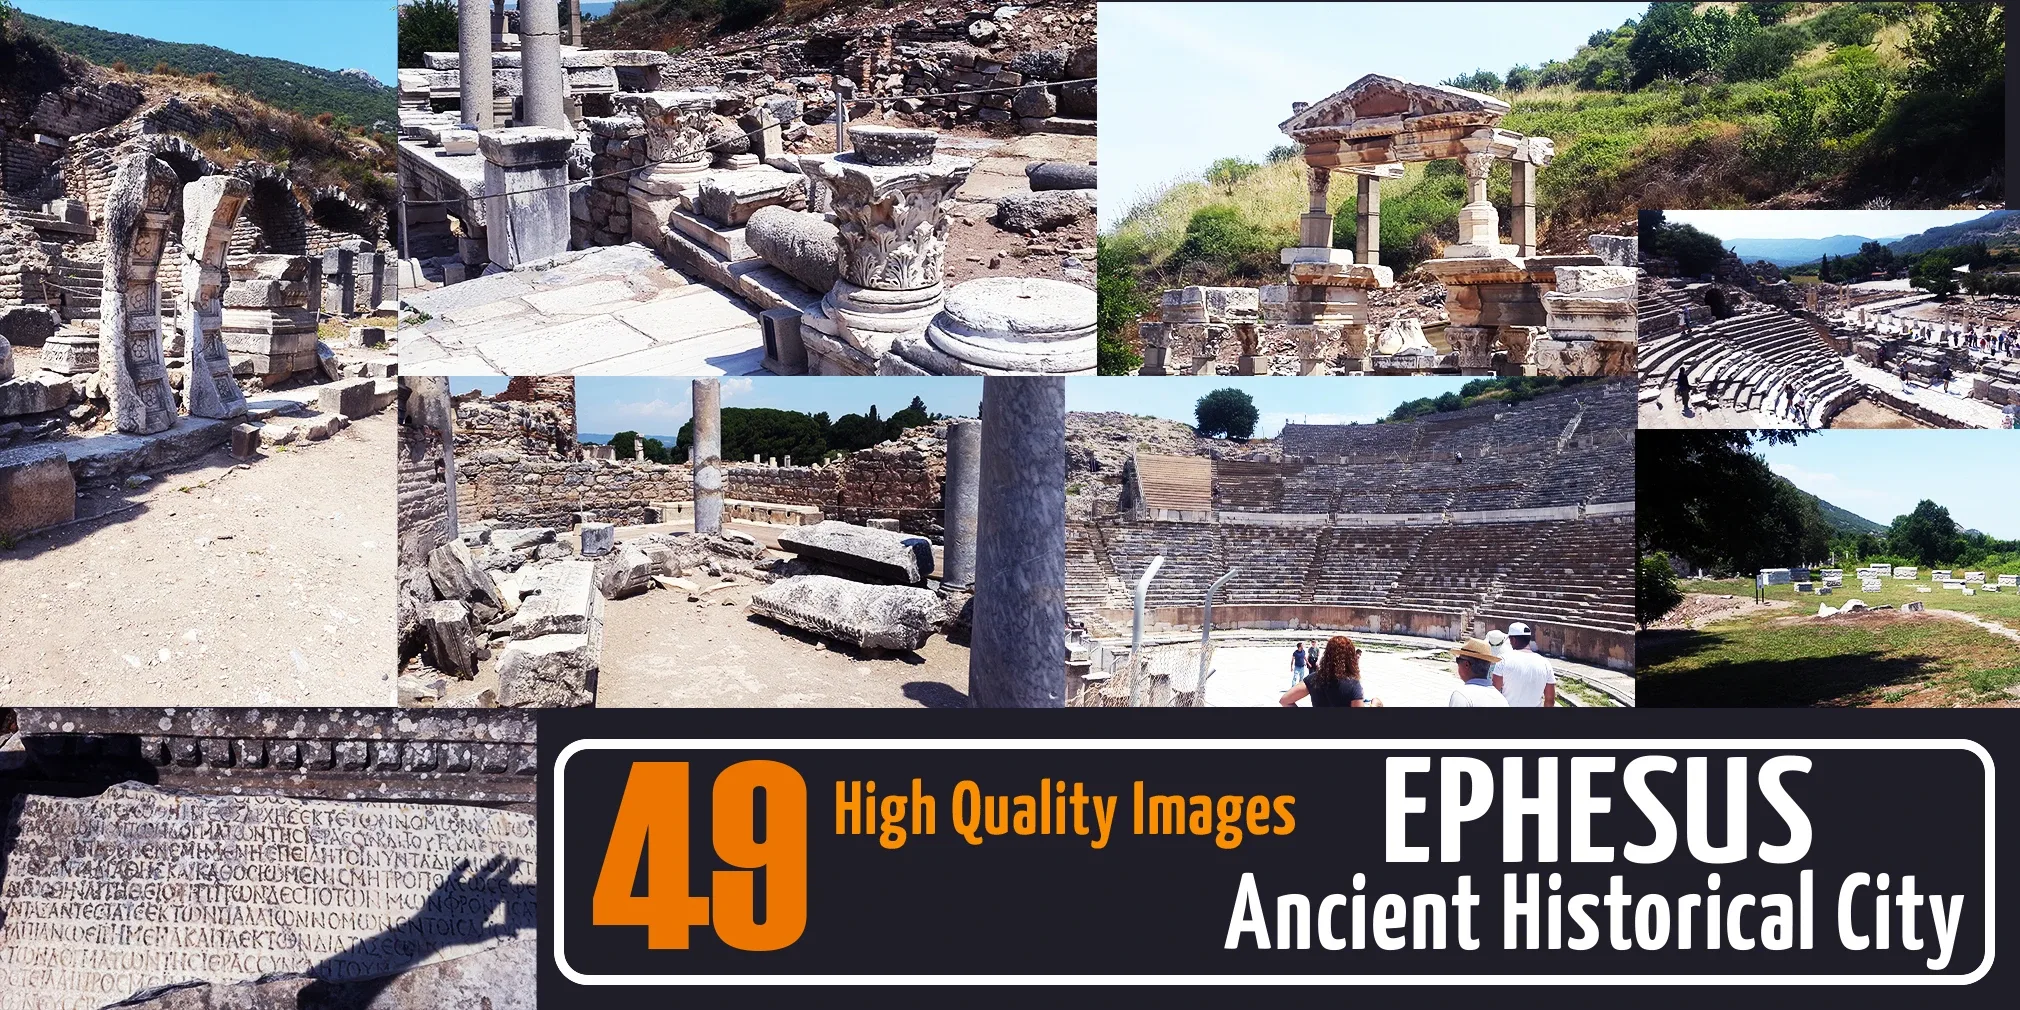 49 EPHESUS ANCIENT HISTORICAL CITY HIGH QUALITY IMAGES